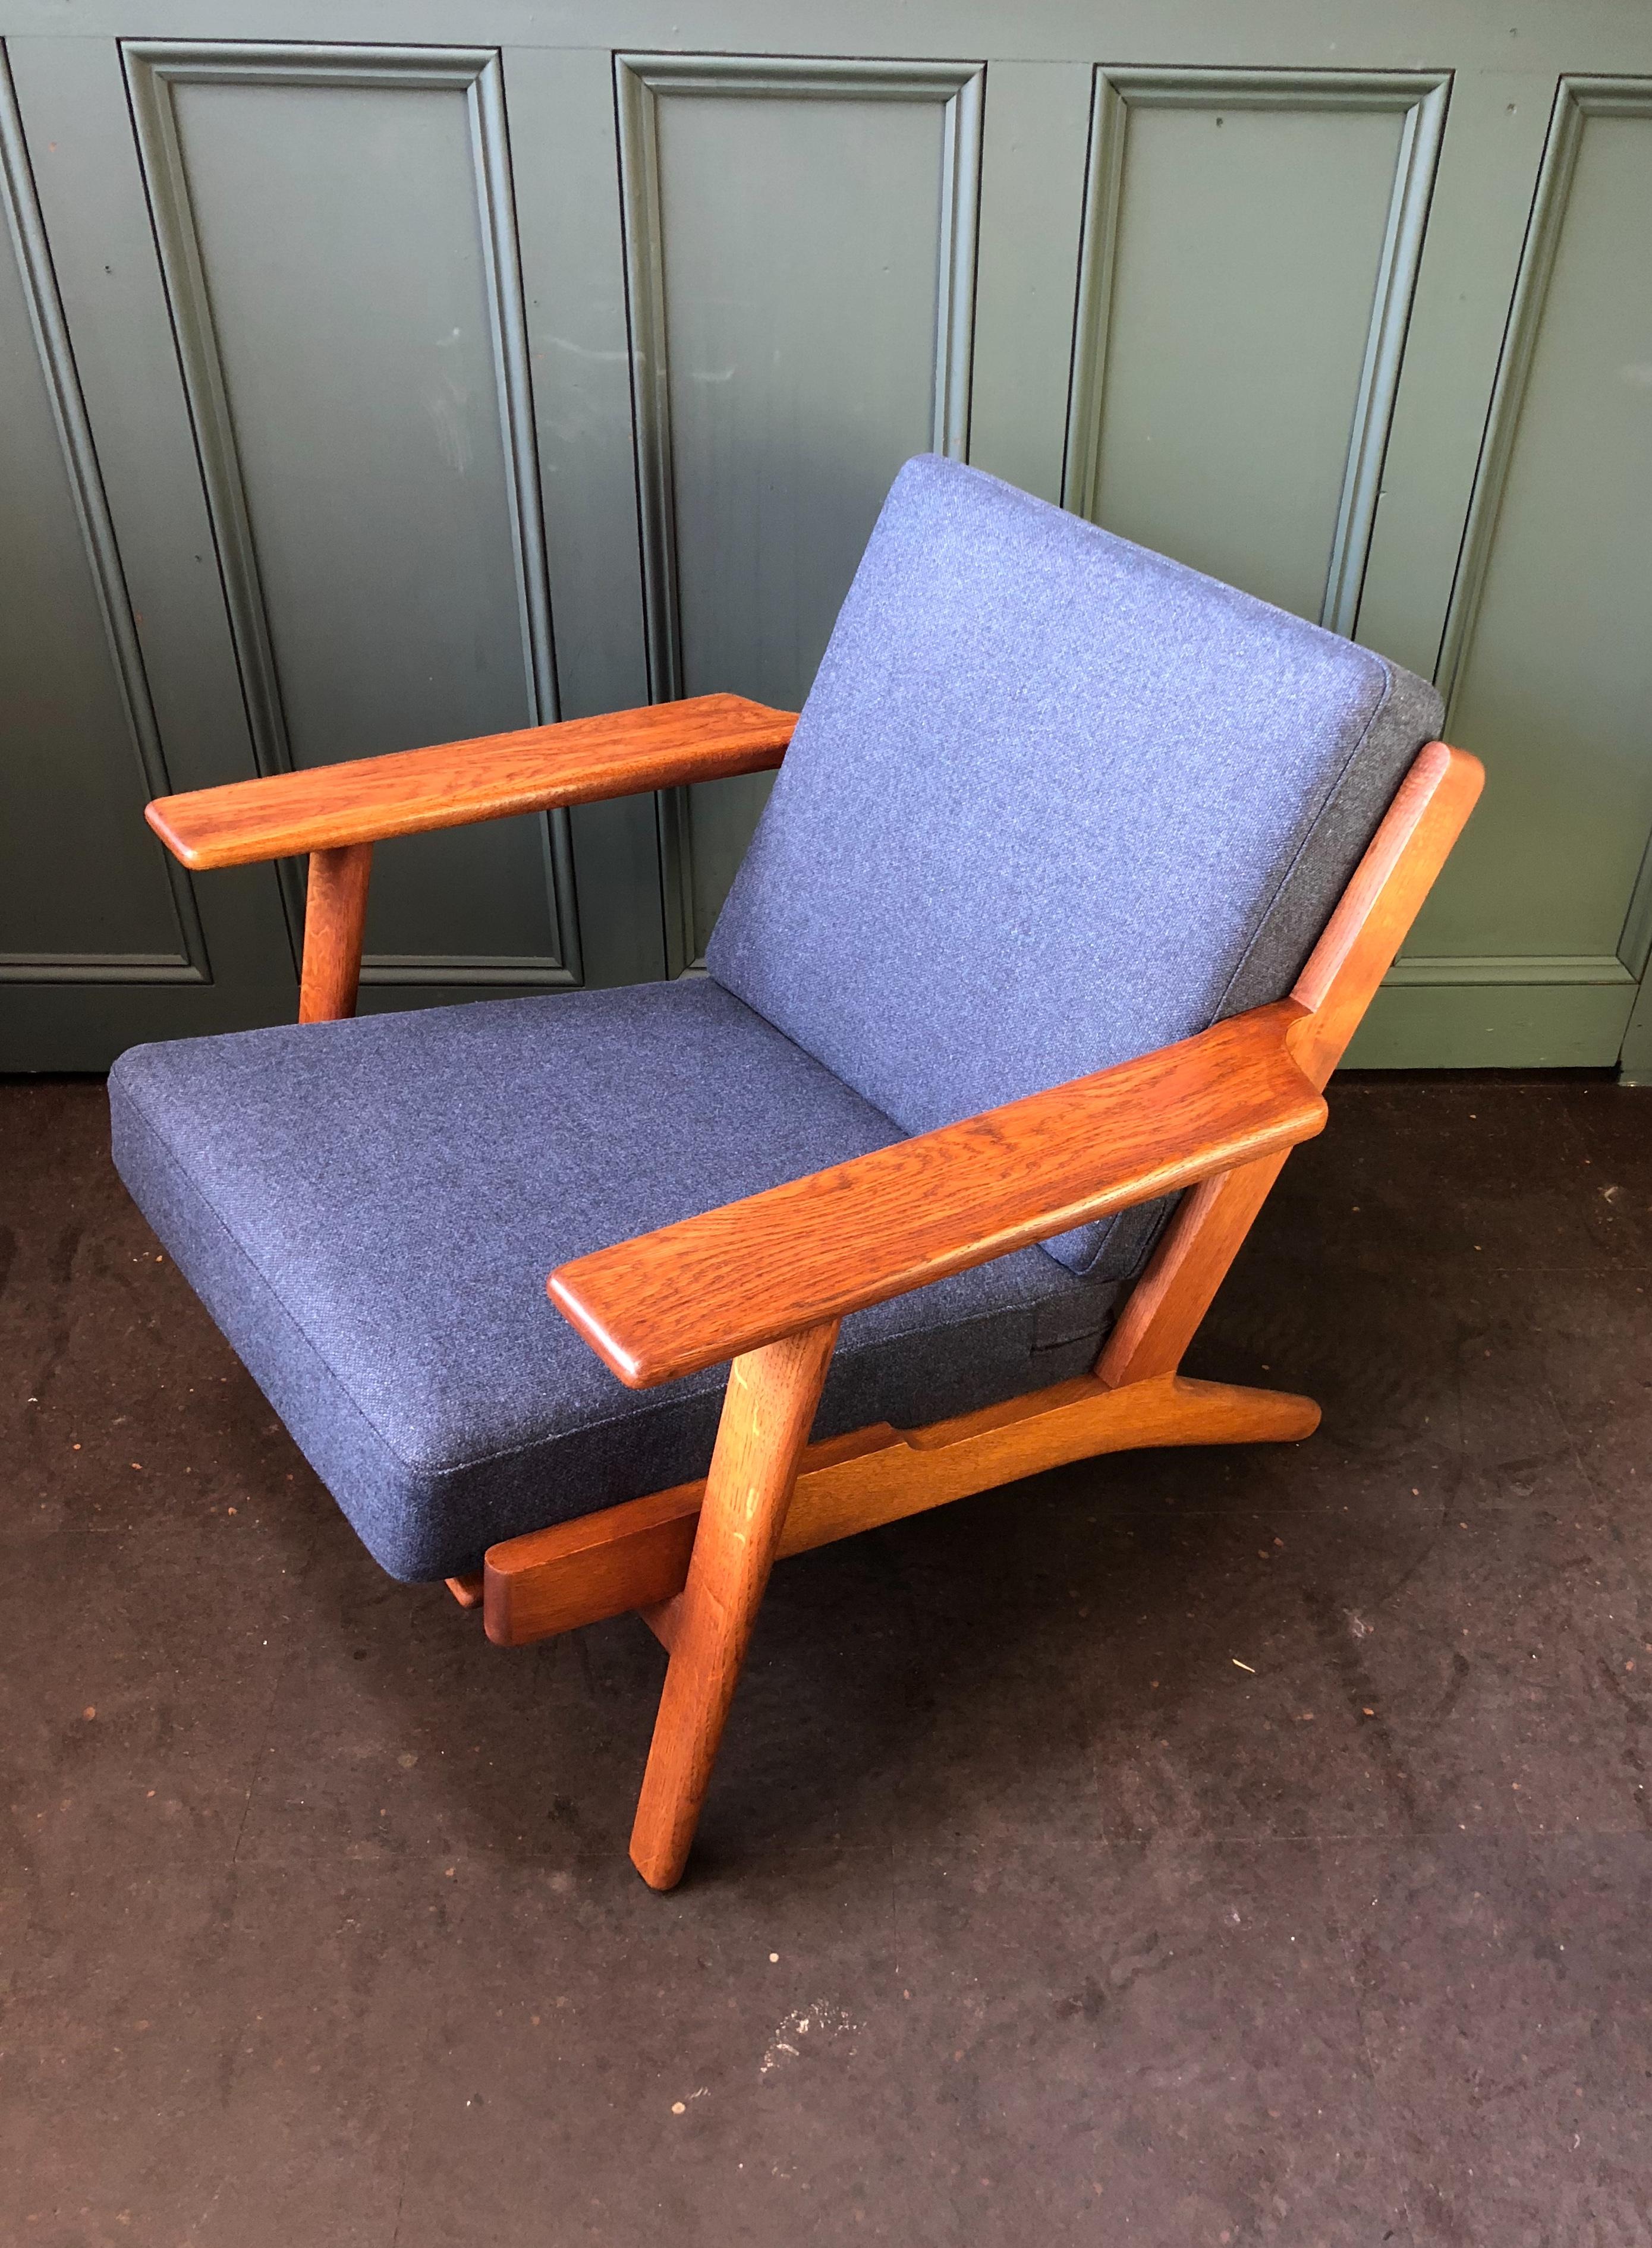 An original 1950’s GETAMA ge290 lounge chair by Hans Wegner. This chair has been fully refurbished and reupholstered in a fabric sympathetic to its heritage. European oak frame with metal sprung cushions. Original makers and designers stamps still